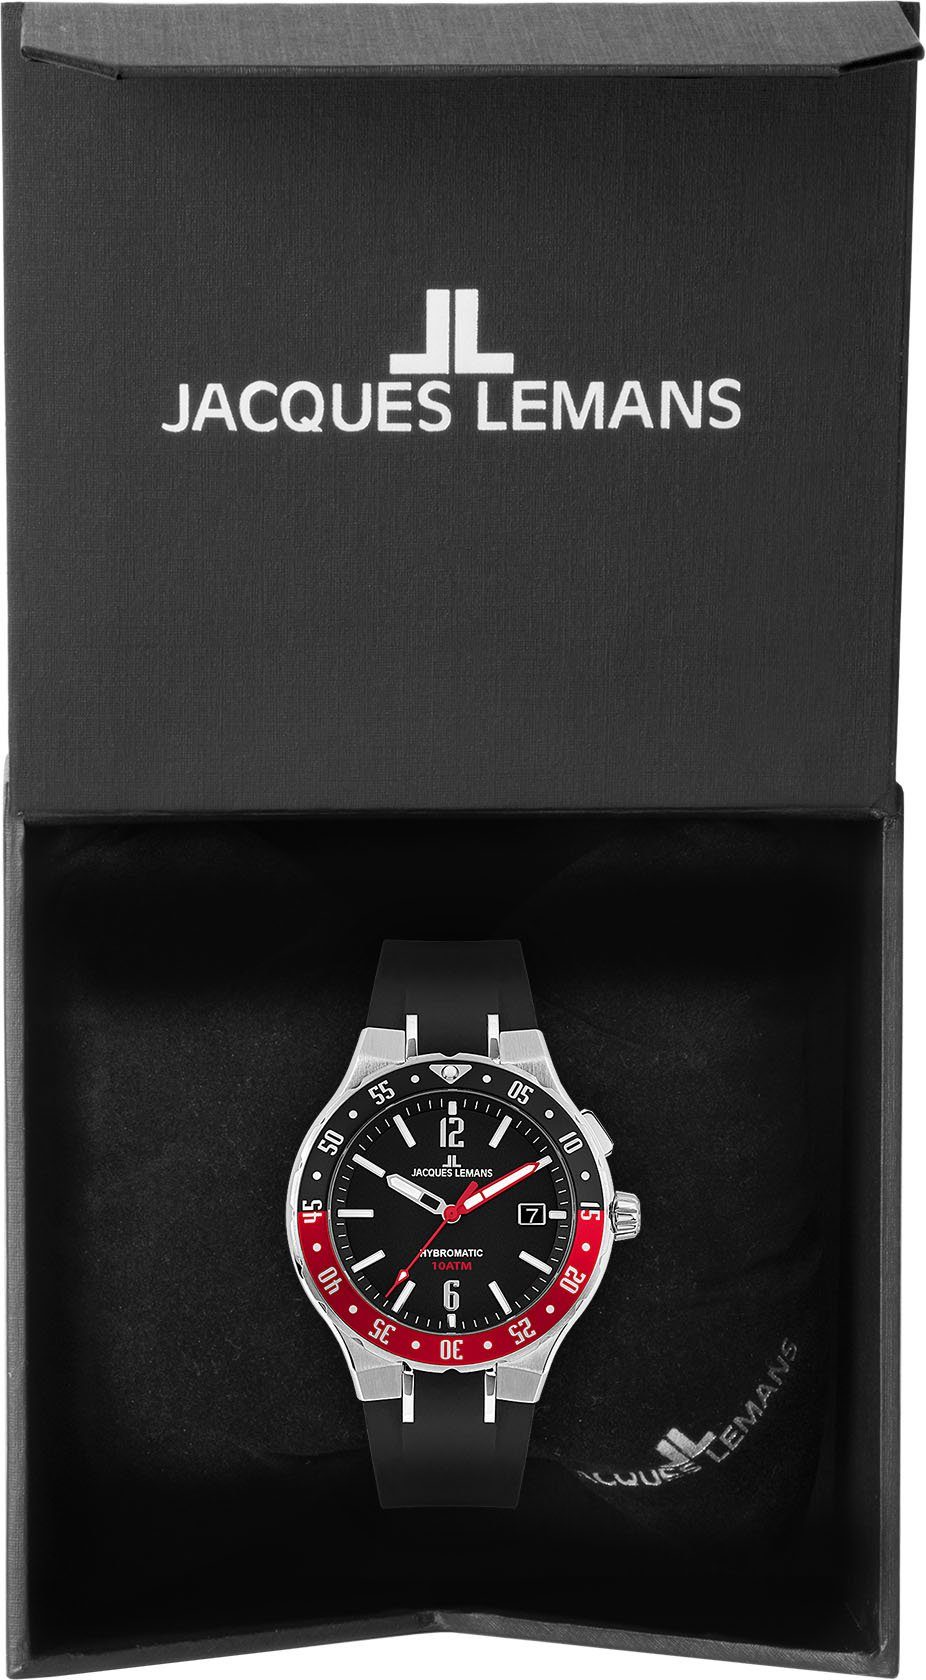 Jacques Lemans schwarz Kineticuhr 1-2109A rot, Hybromatic